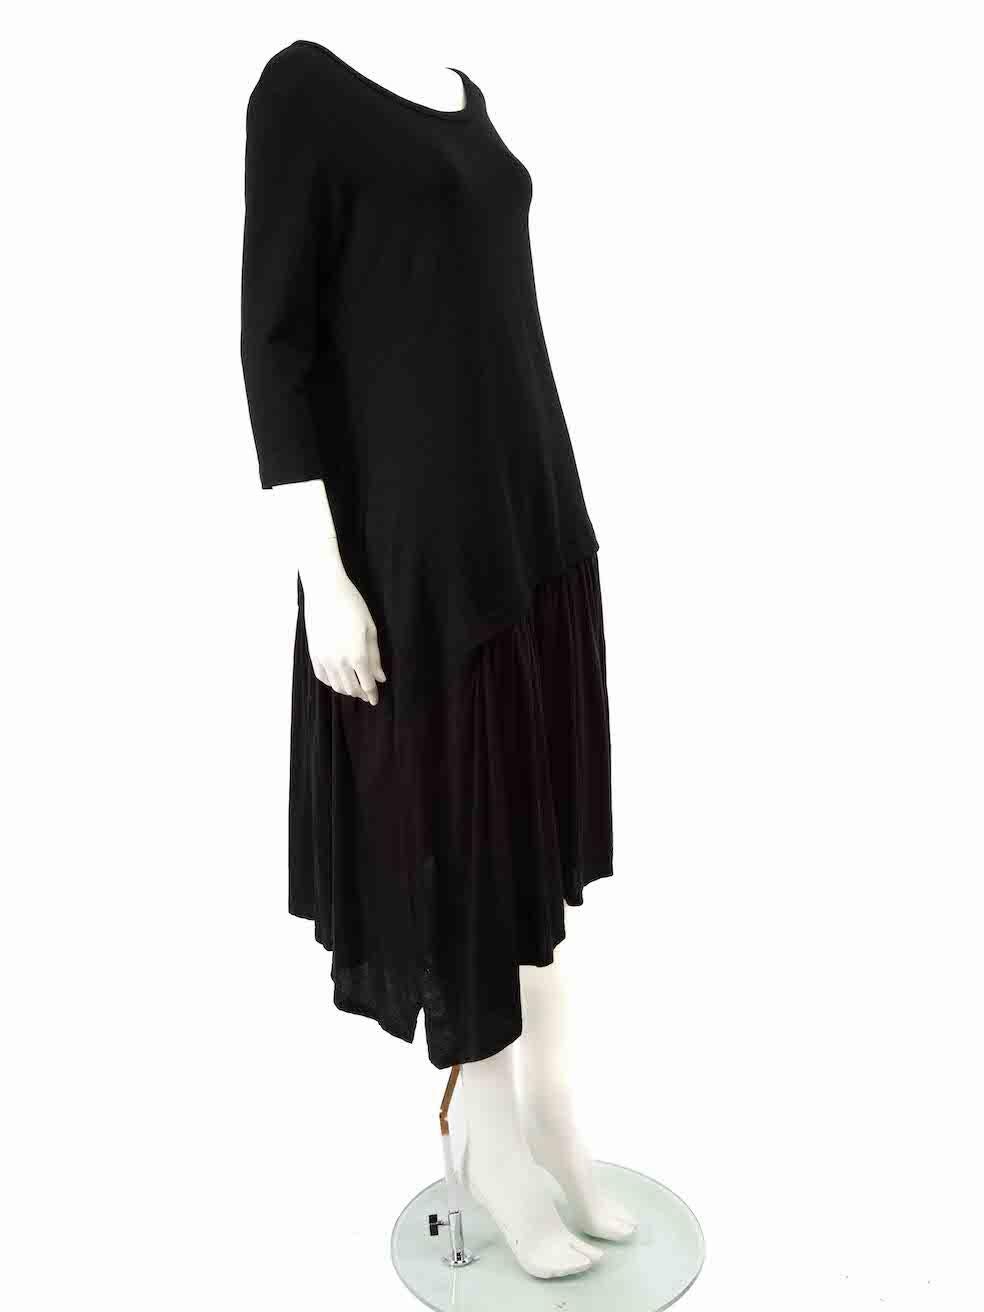 CONDITION is Very good. Hardly any visible wear to dress is evident on this used Y's by Yohji Yamamoto designer resale item.
 
 
 
 Details
 
 
 Black
 
 Wool
 
 Dress
 
 Long sleeves
 
 Midi
 
 Round neck
 
 Ruffle skirt
 
 1x Side pocket
 
 
 
 
